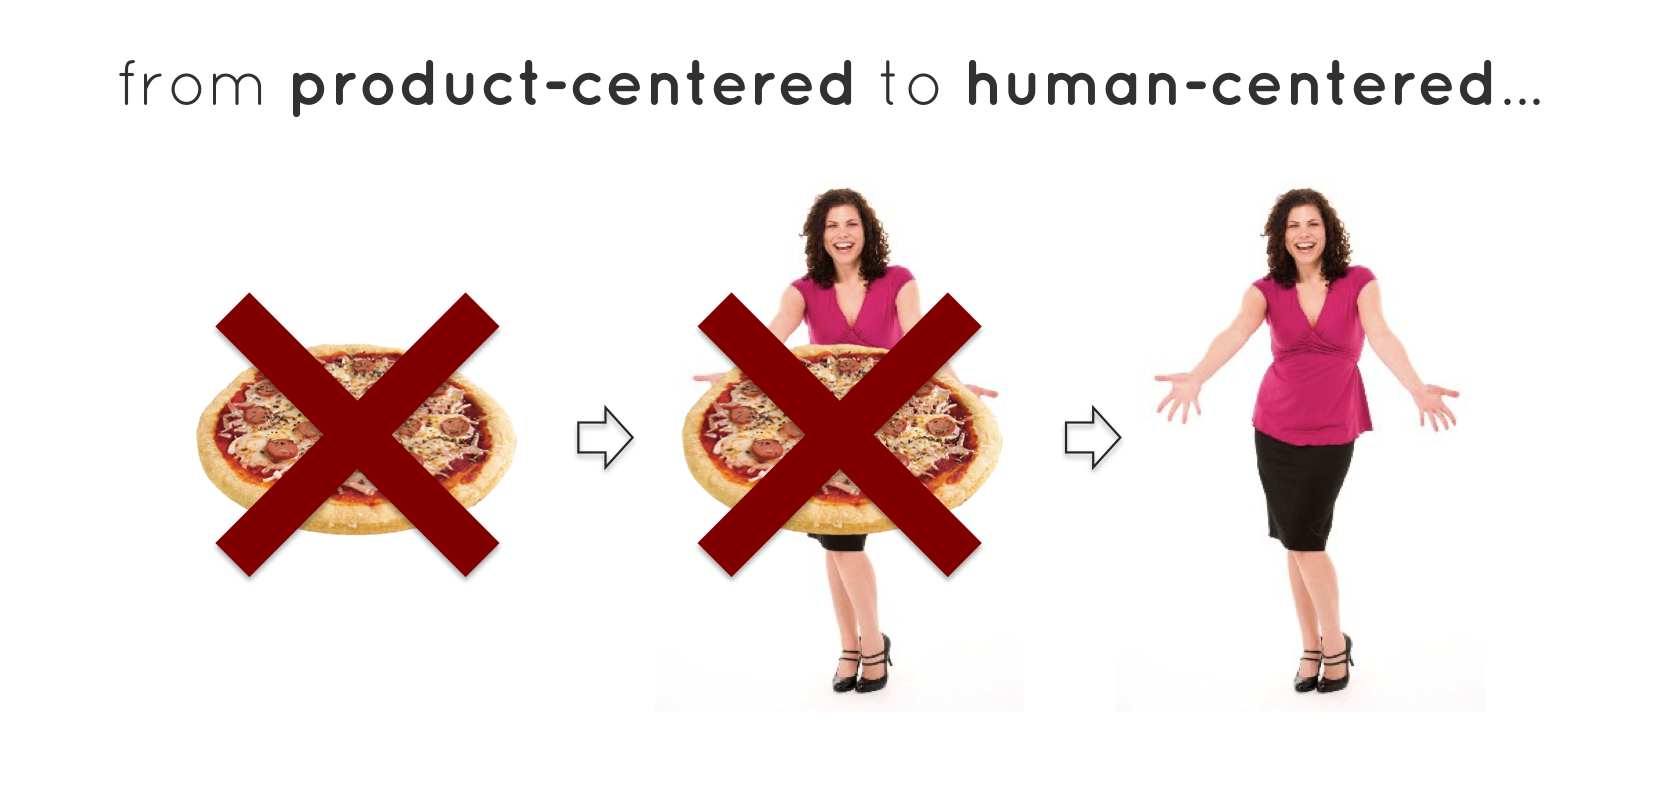 from product-centered to human-centered